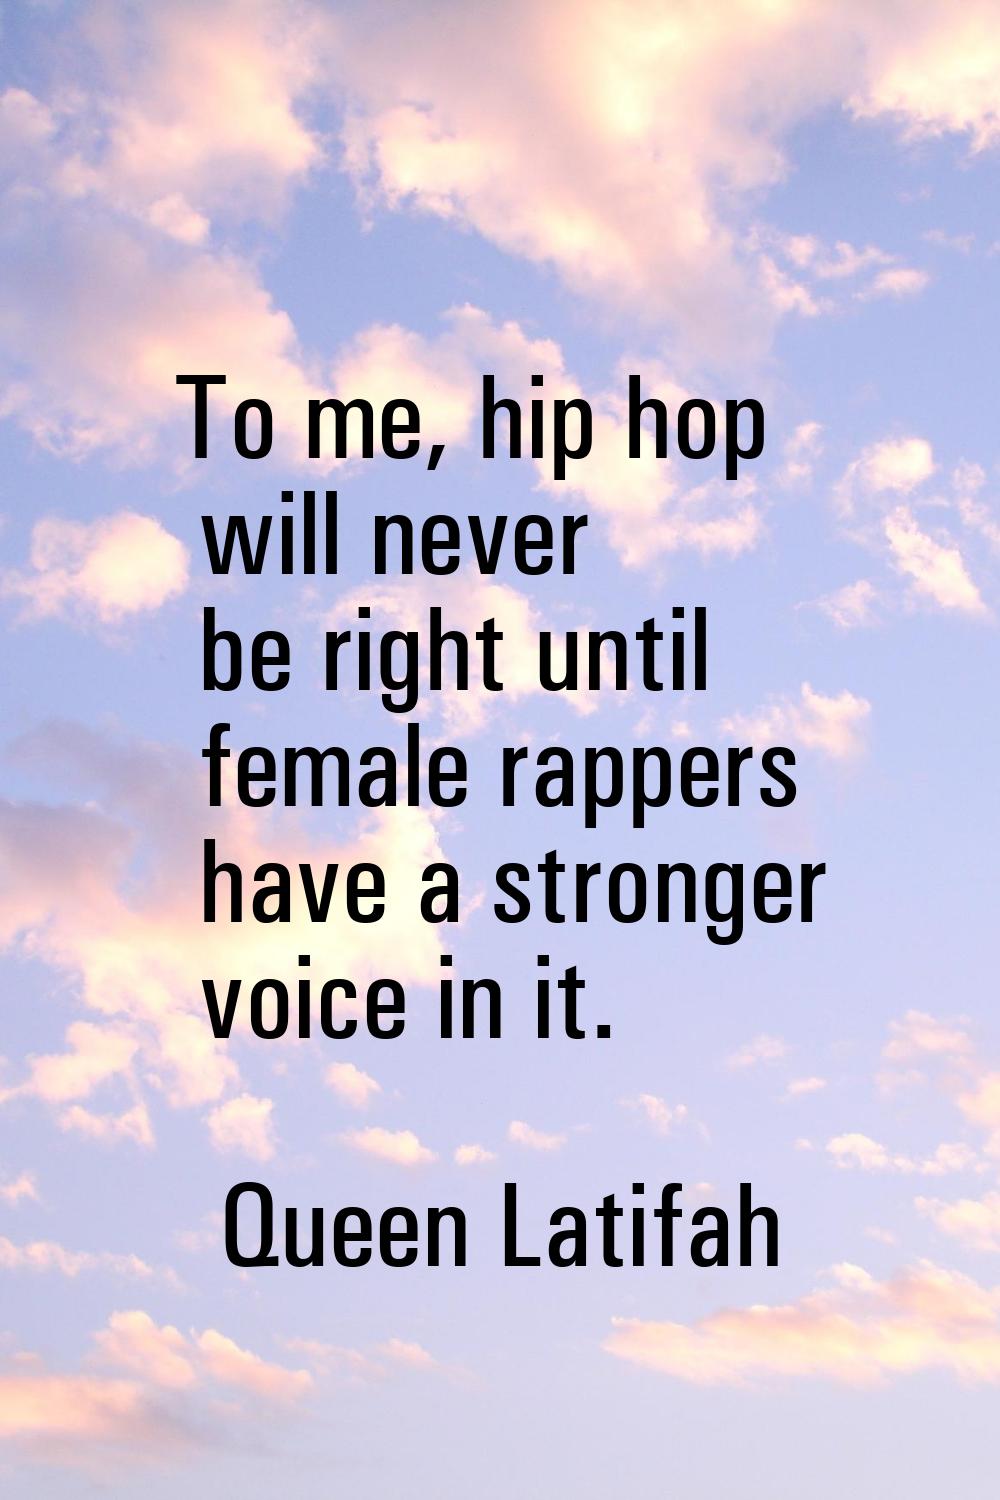 To me, hip hop will never be right until female rappers have a stronger voice in it.